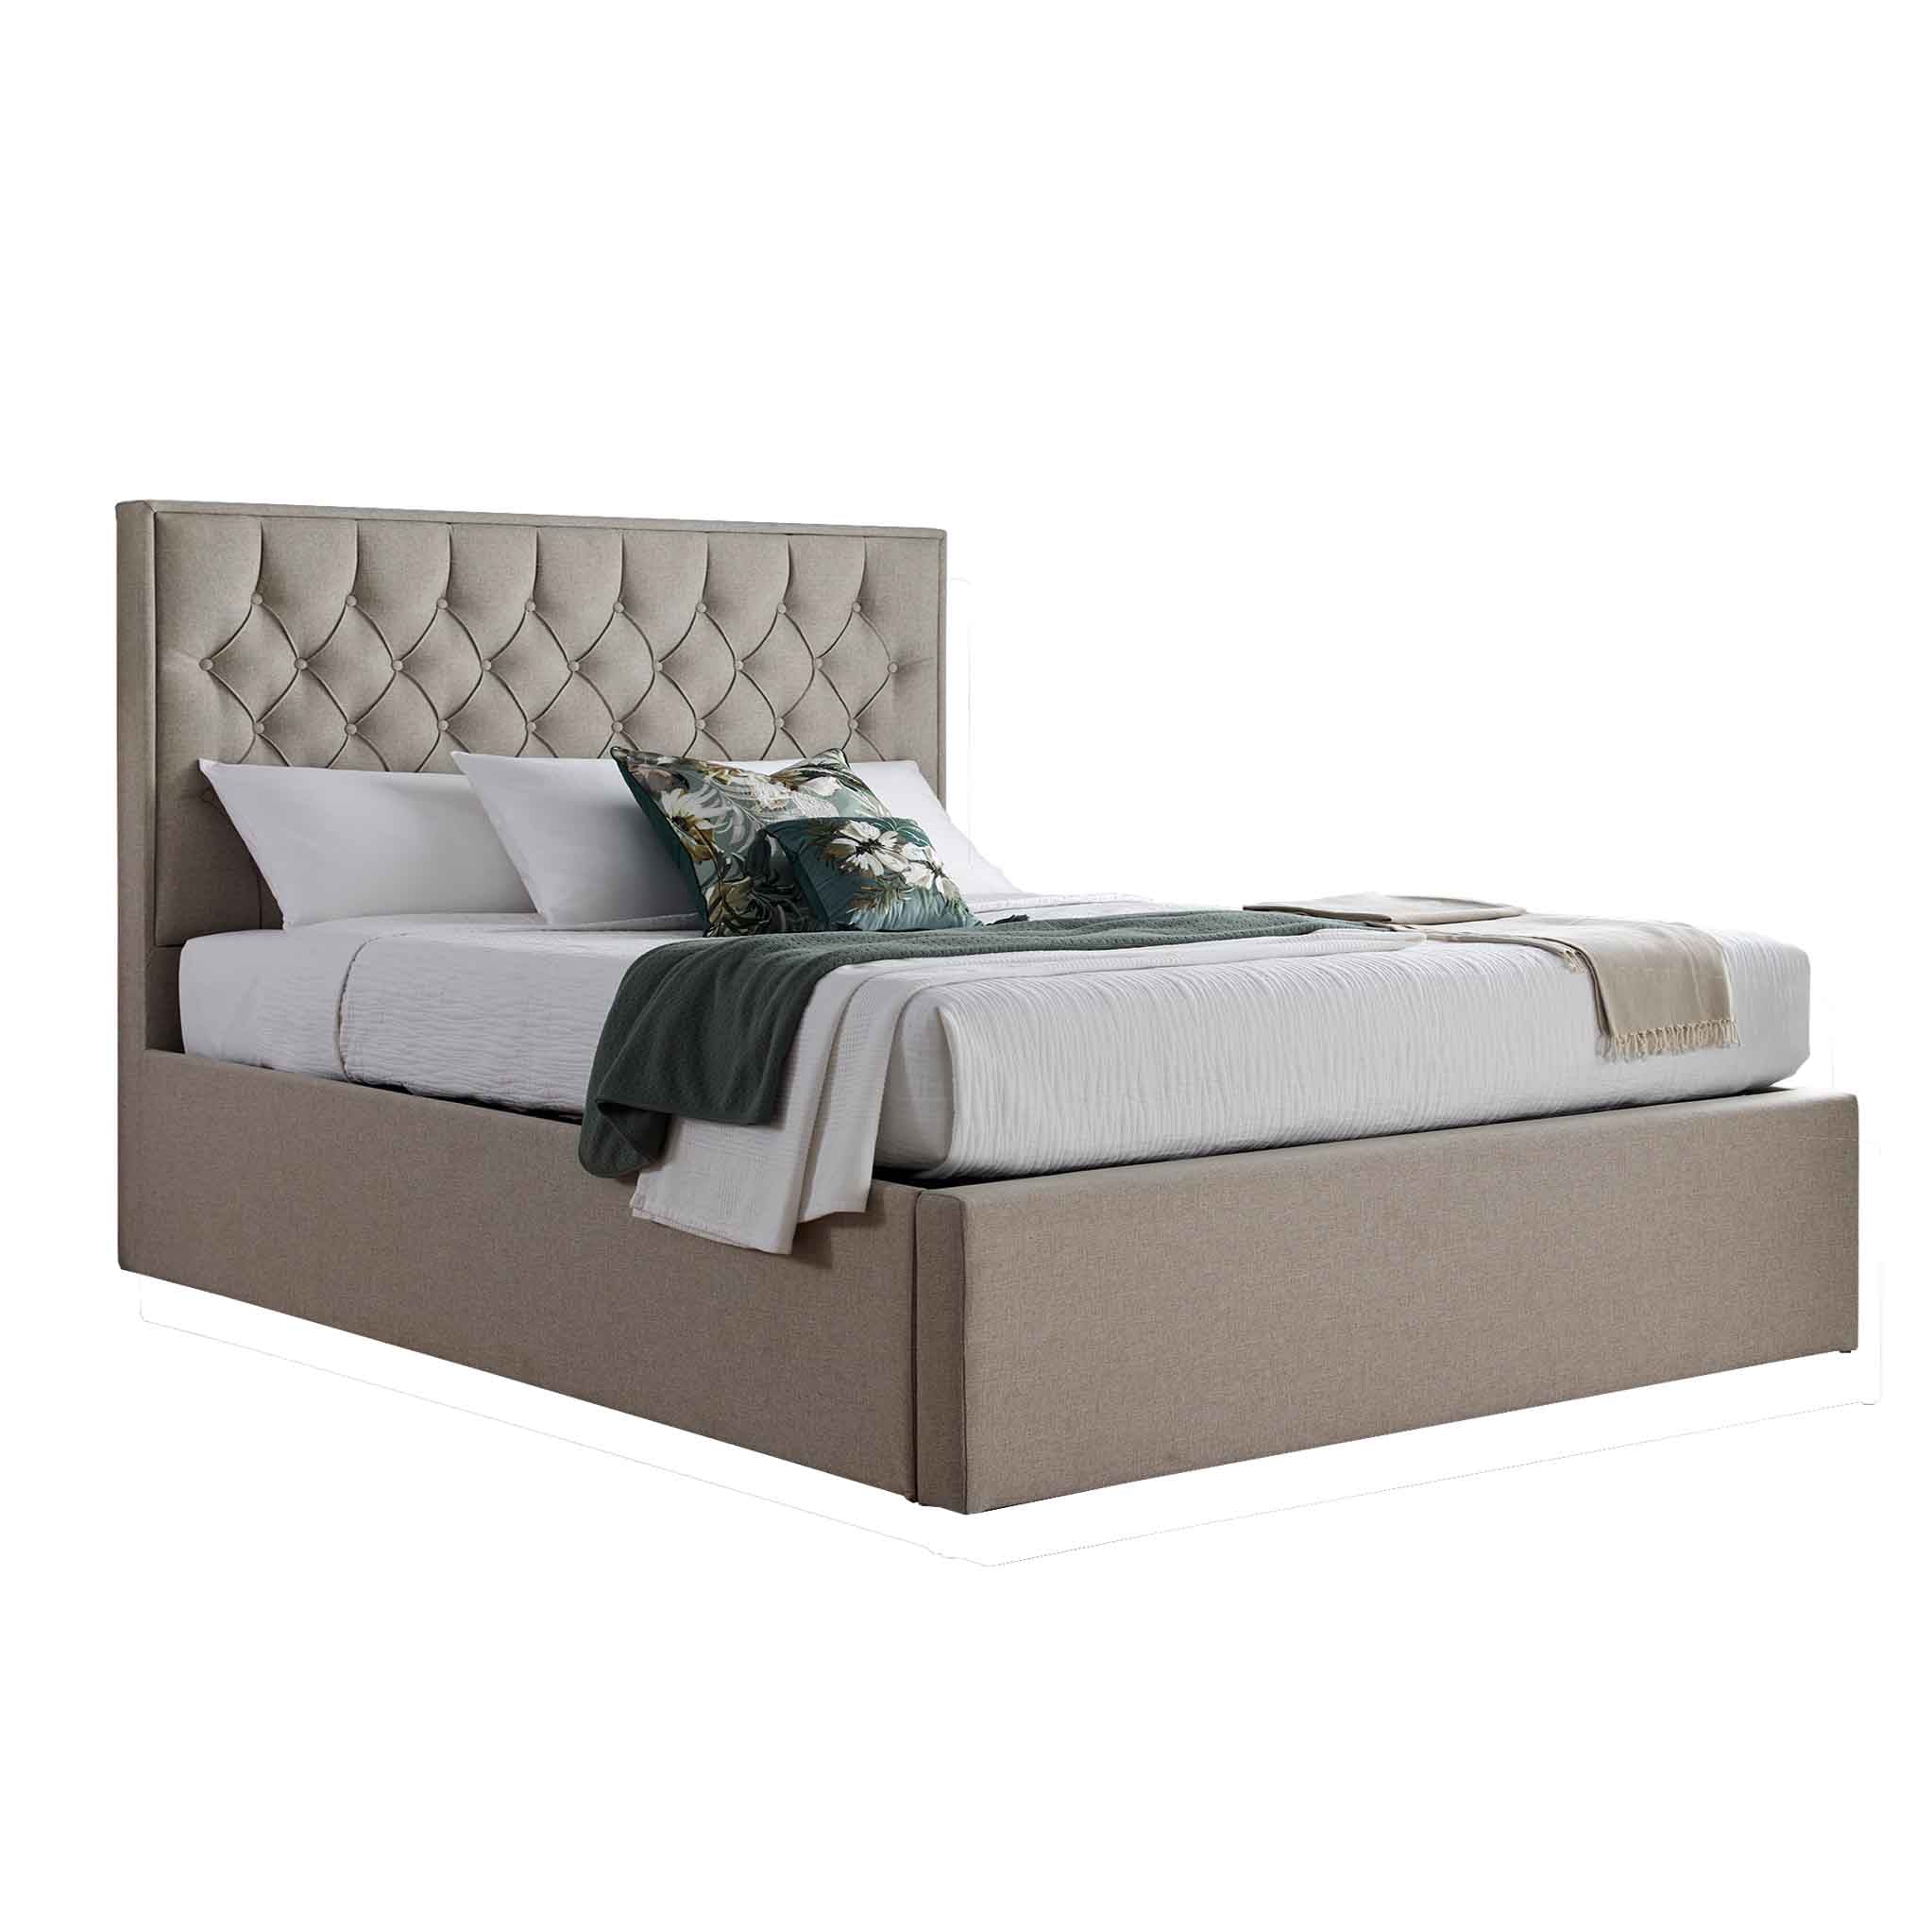 Sutton Fabric Ottoman Storage Bed Double King Size Roseland